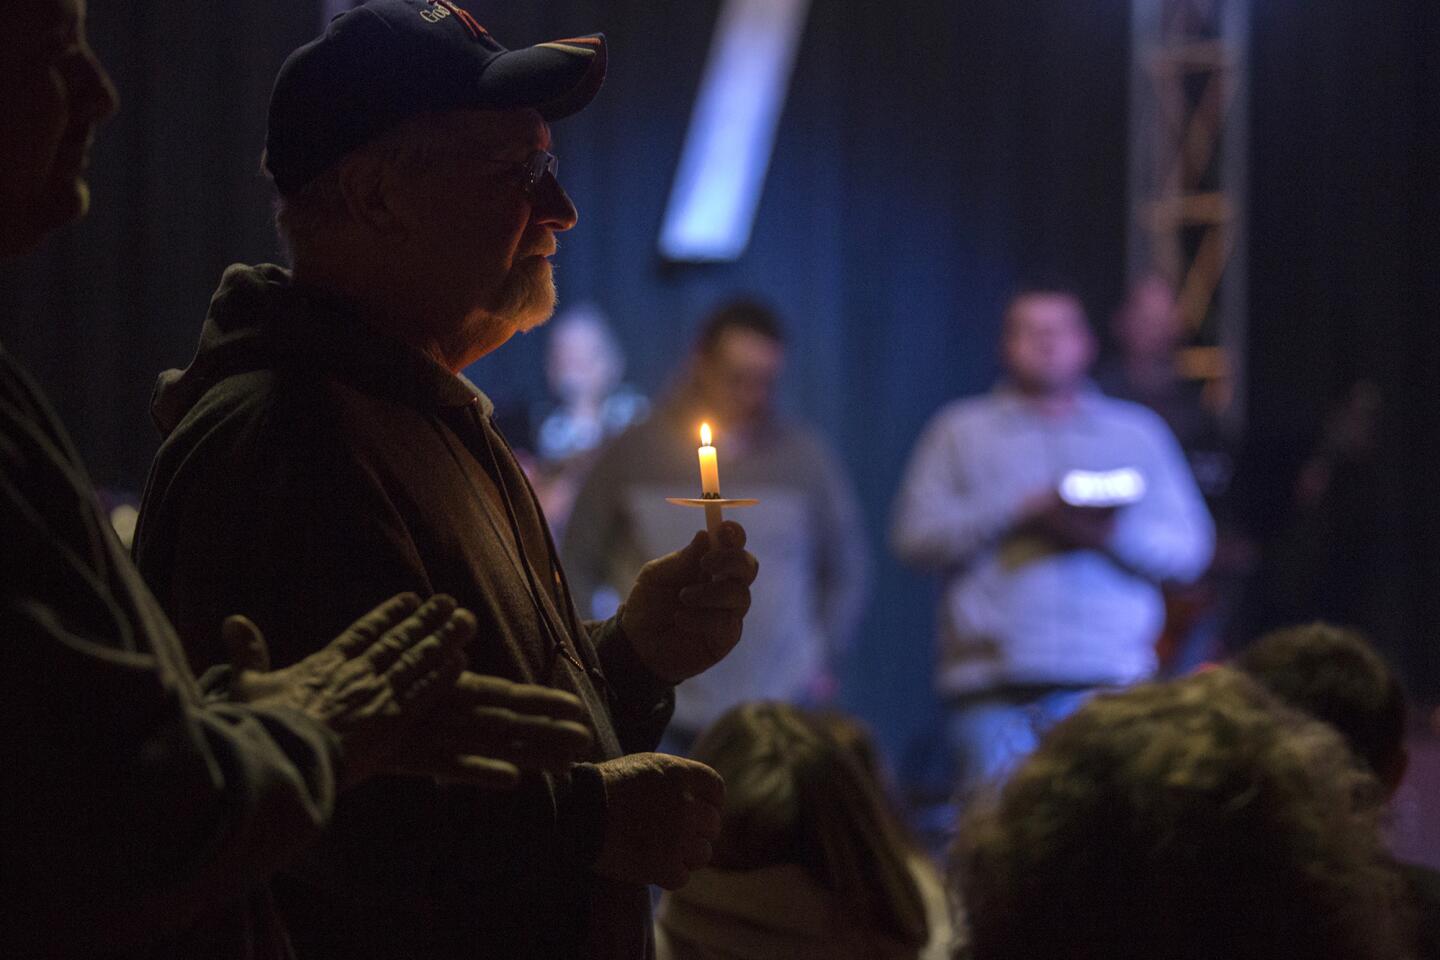 Stan Collins of Benton, second from left, holds a candle during a vigil at Impact Church in Benton, Ky. on Jan. 23, 2018. The vigil was held for victims of the Marshall County High School shooting.